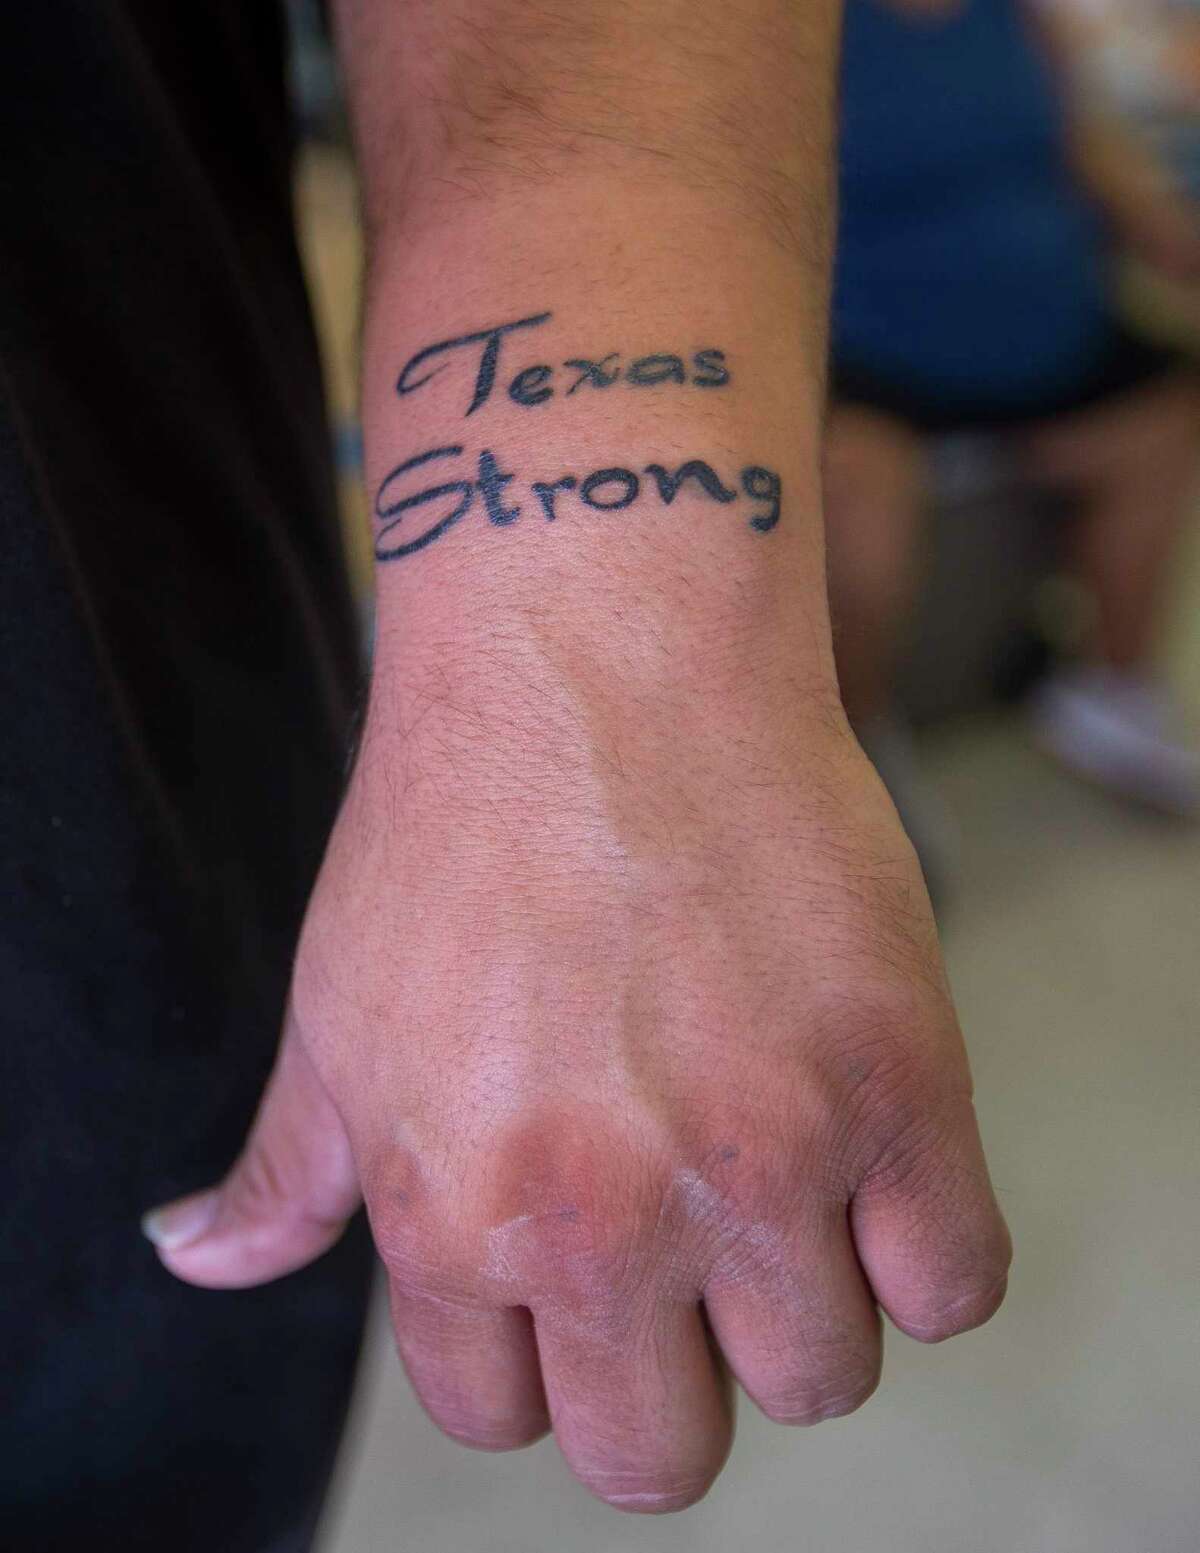 "Surviving" is how Brian Torres, of Tivoli, TX, describes the reason for his new 'Texas Strong' tattoo, Tuesday, Sept. 12, 2017. Torres rode the storm out in a trailer in Tivoli, an unincorporated town located between Port Lavaca and Rockport, a harrowing experience he likens to that feeling when a plane is just about to touch down on the runway and bounces continuously.